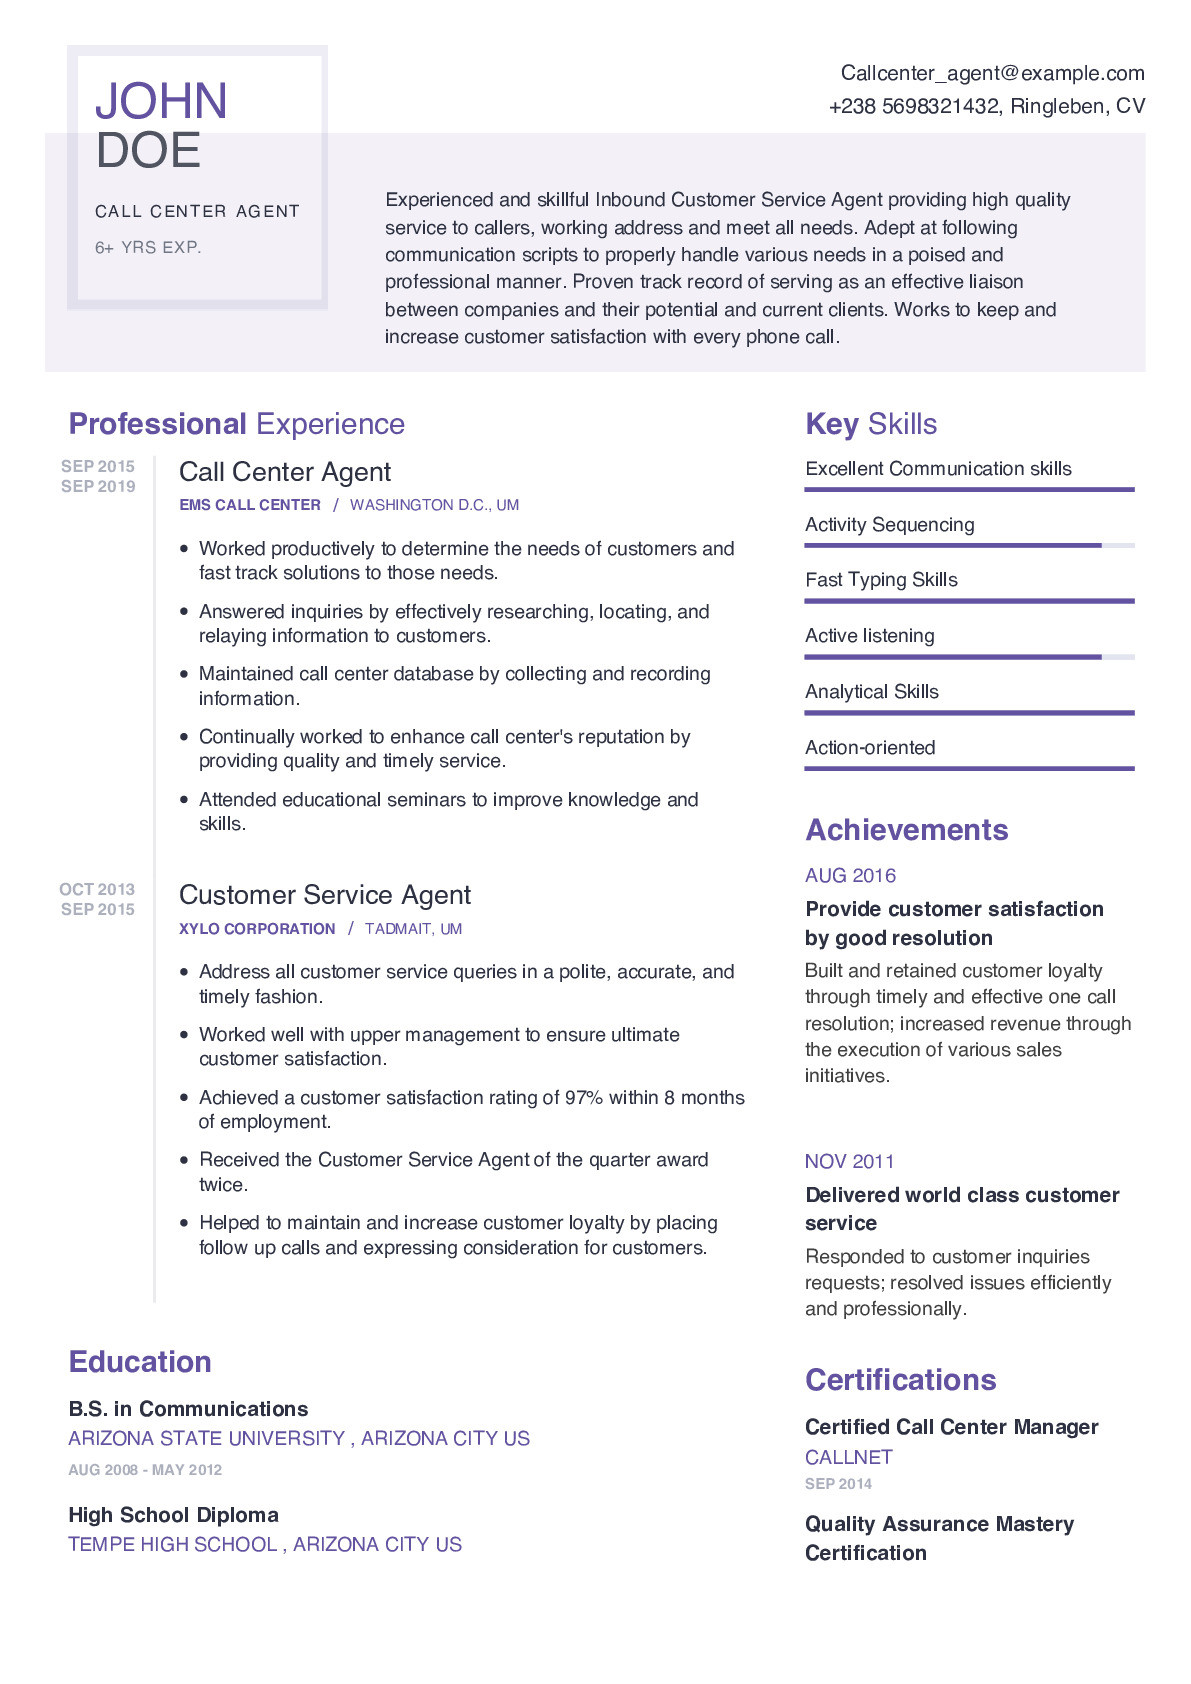 Sample Resume Showing Telephone Answering Skills Call Center Agent Resume Example with Content Sample Craftmycv